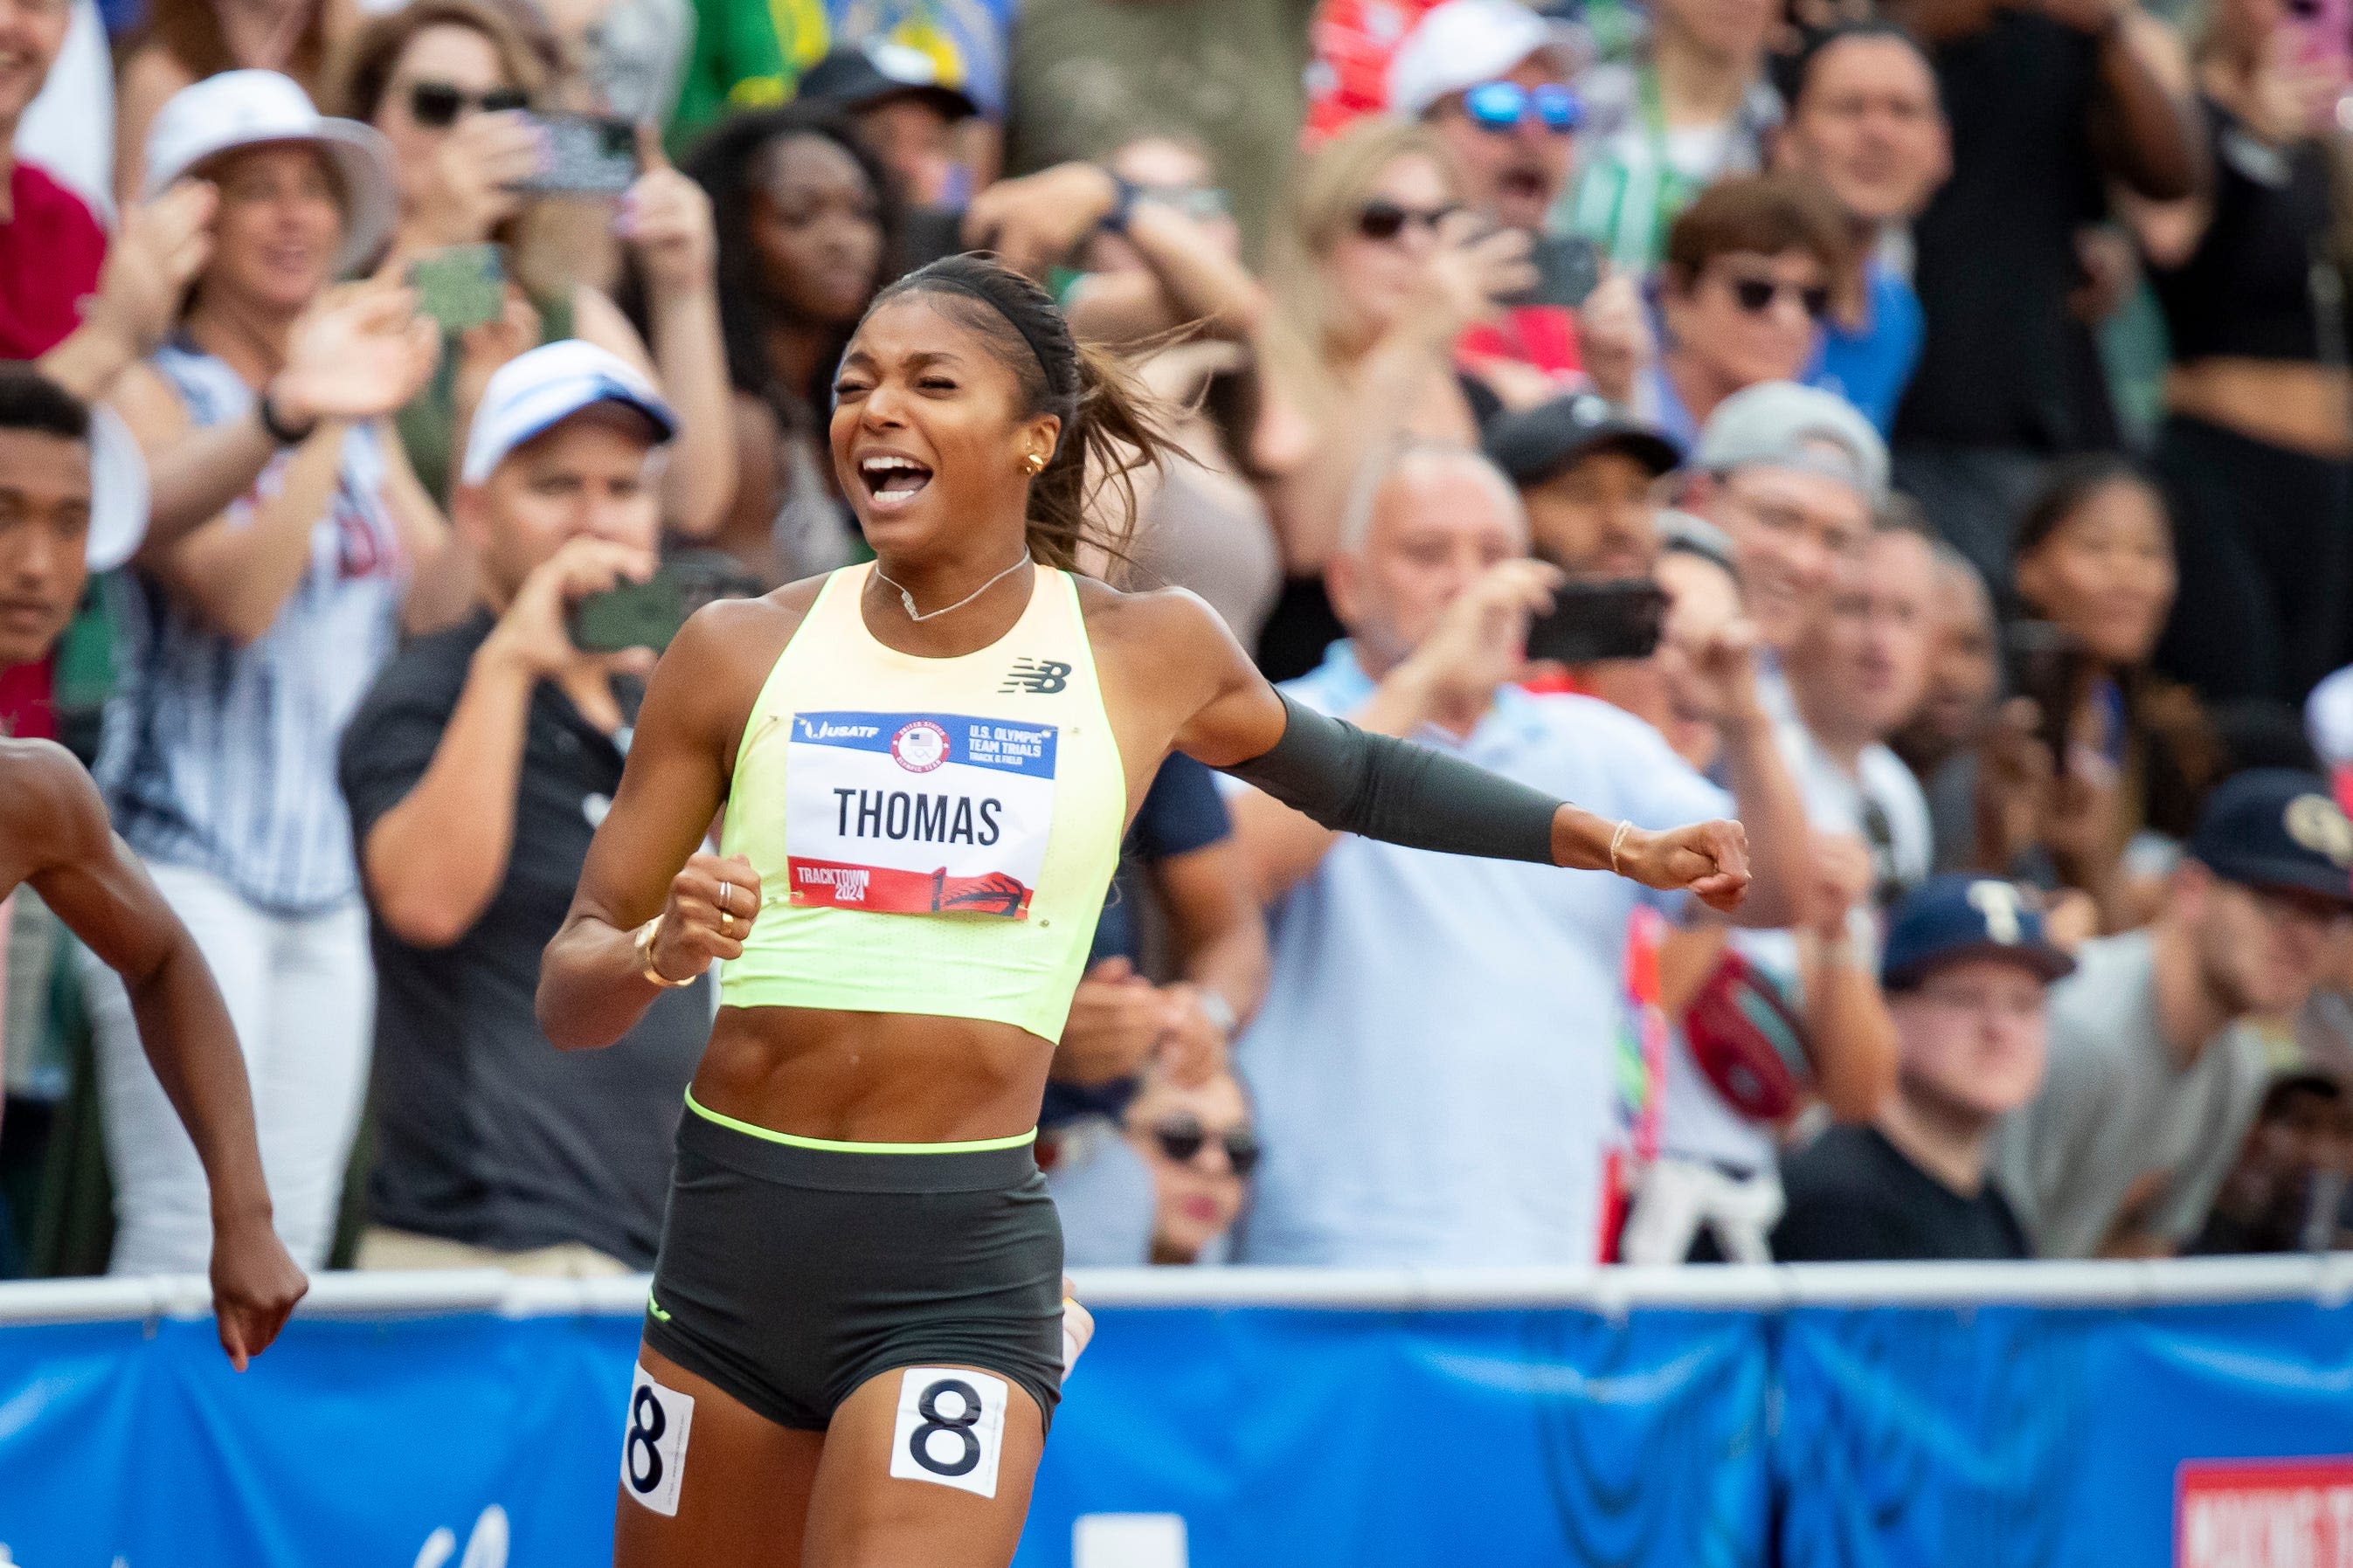 Gabby Thomas outlasts loaded field to capture 200-meter title at U.S. Olympic Trials